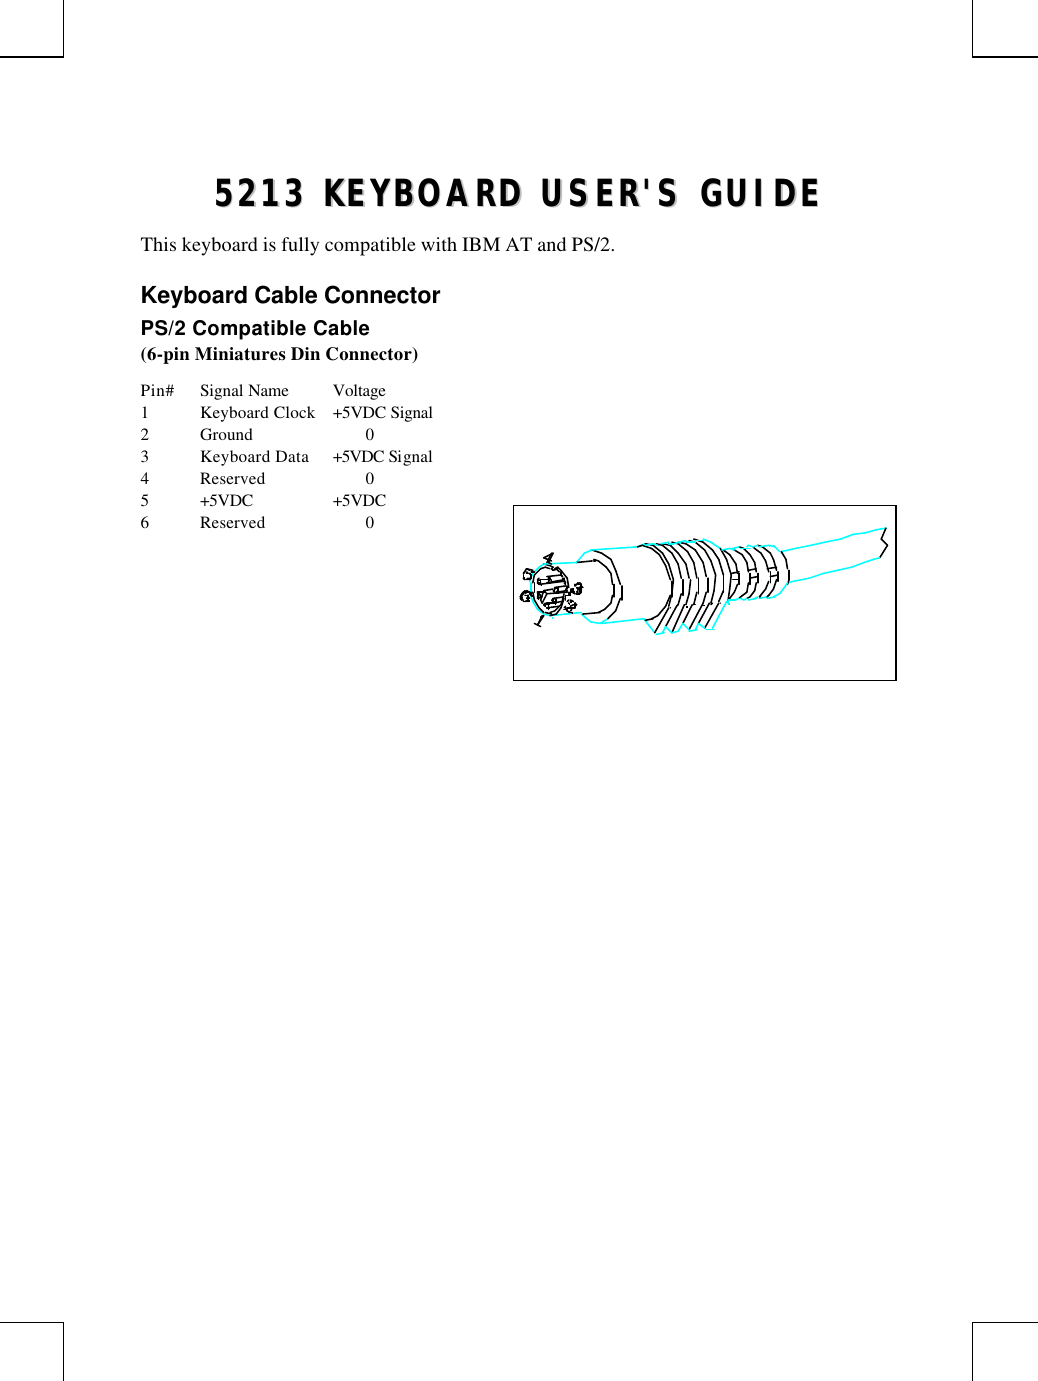 55221133  KKEEYYBBOOAARRDD  UUSSEERR&apos;&apos;SS  GGUUIIDDEEThis keyboard is fully compatible with IBM AT and PS/2.Keyboard Cable ConnectorPS/2 Compatible Cable(6-pin Miniatures Din Connector)Pin# Signal Name Voltage1Keyboard Clock +5VDC Signal2Ground 03Keyboard Data +5VDC Signal4Reserved 05+5VDC +5VDC6Reserved 0